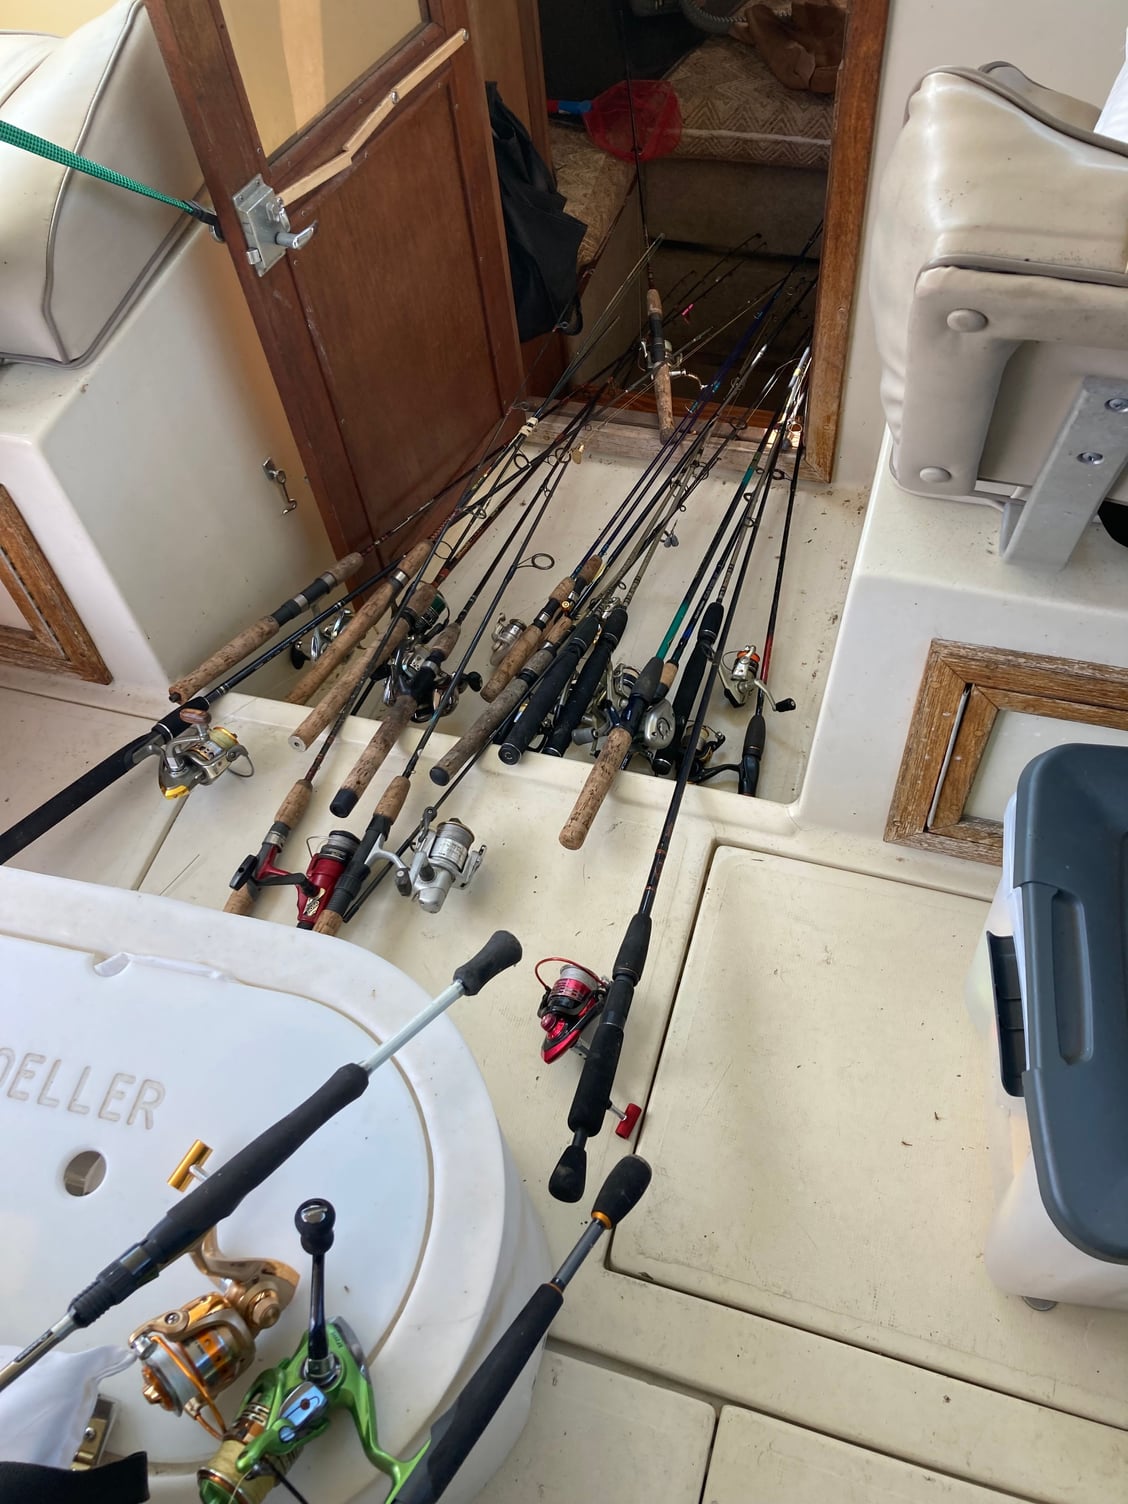 How many rods do you bring on a typical day trip on your boat